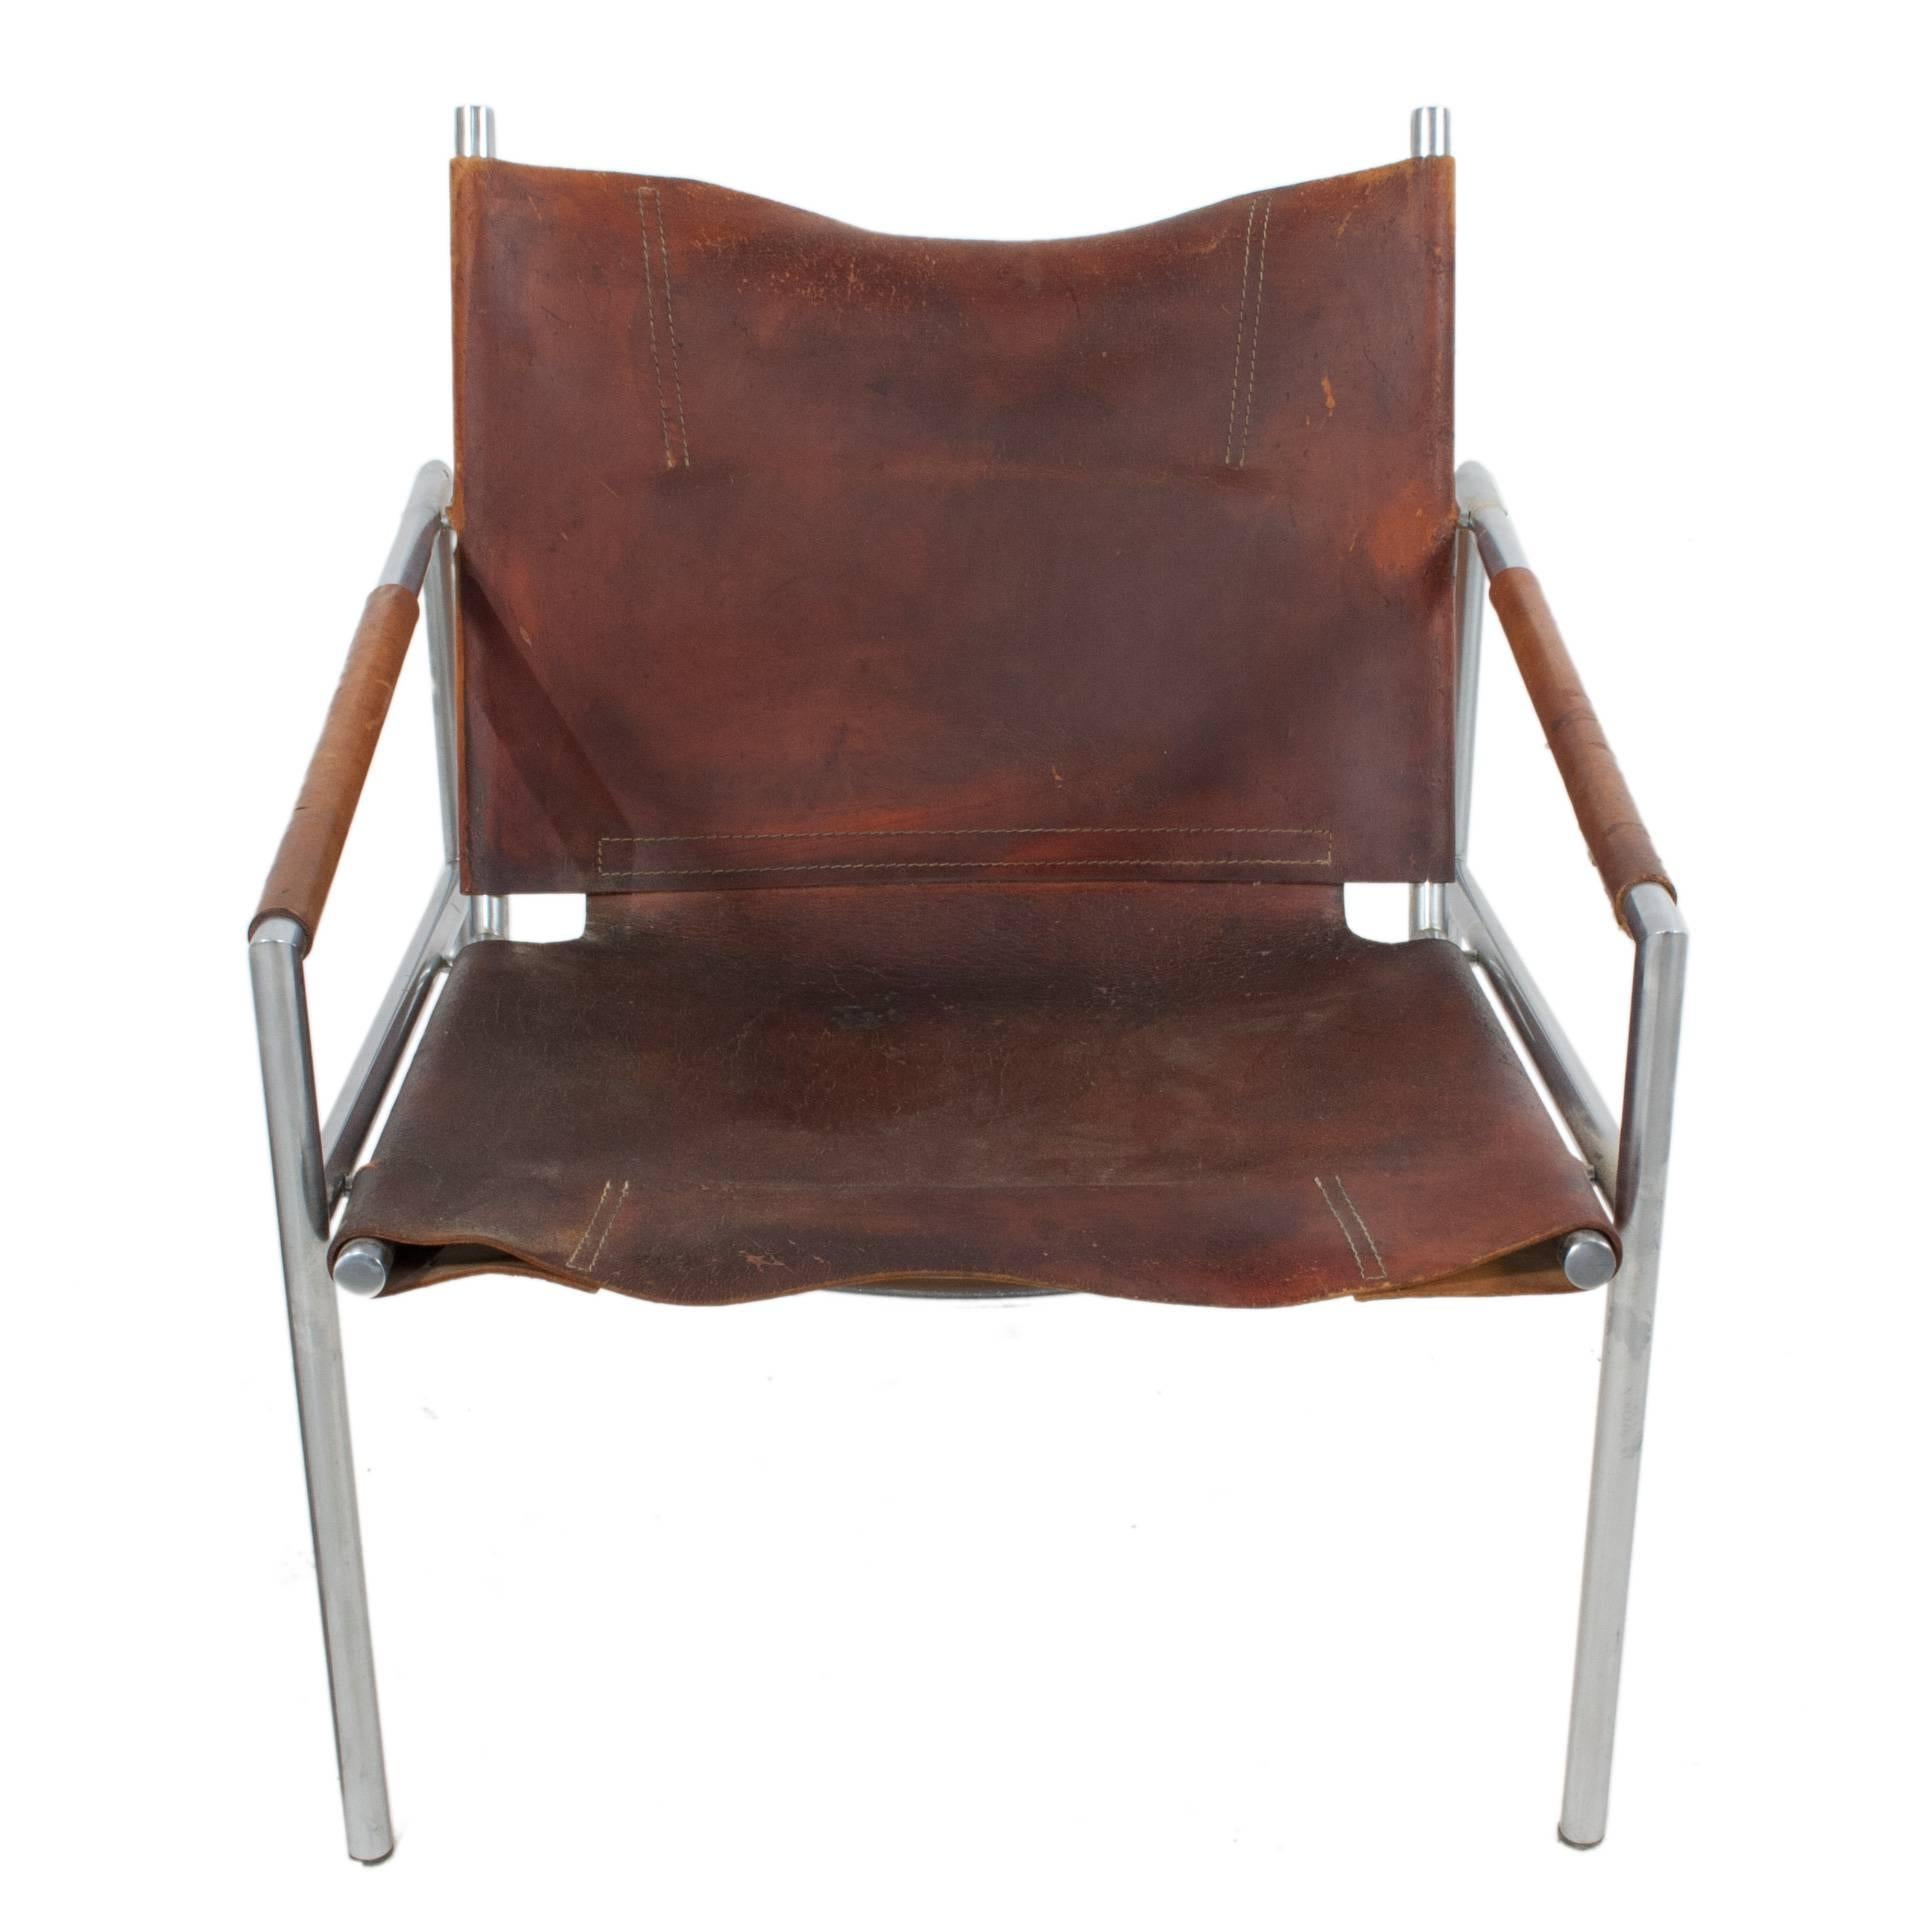 Leather and steel lounge chair by Martin Visser.